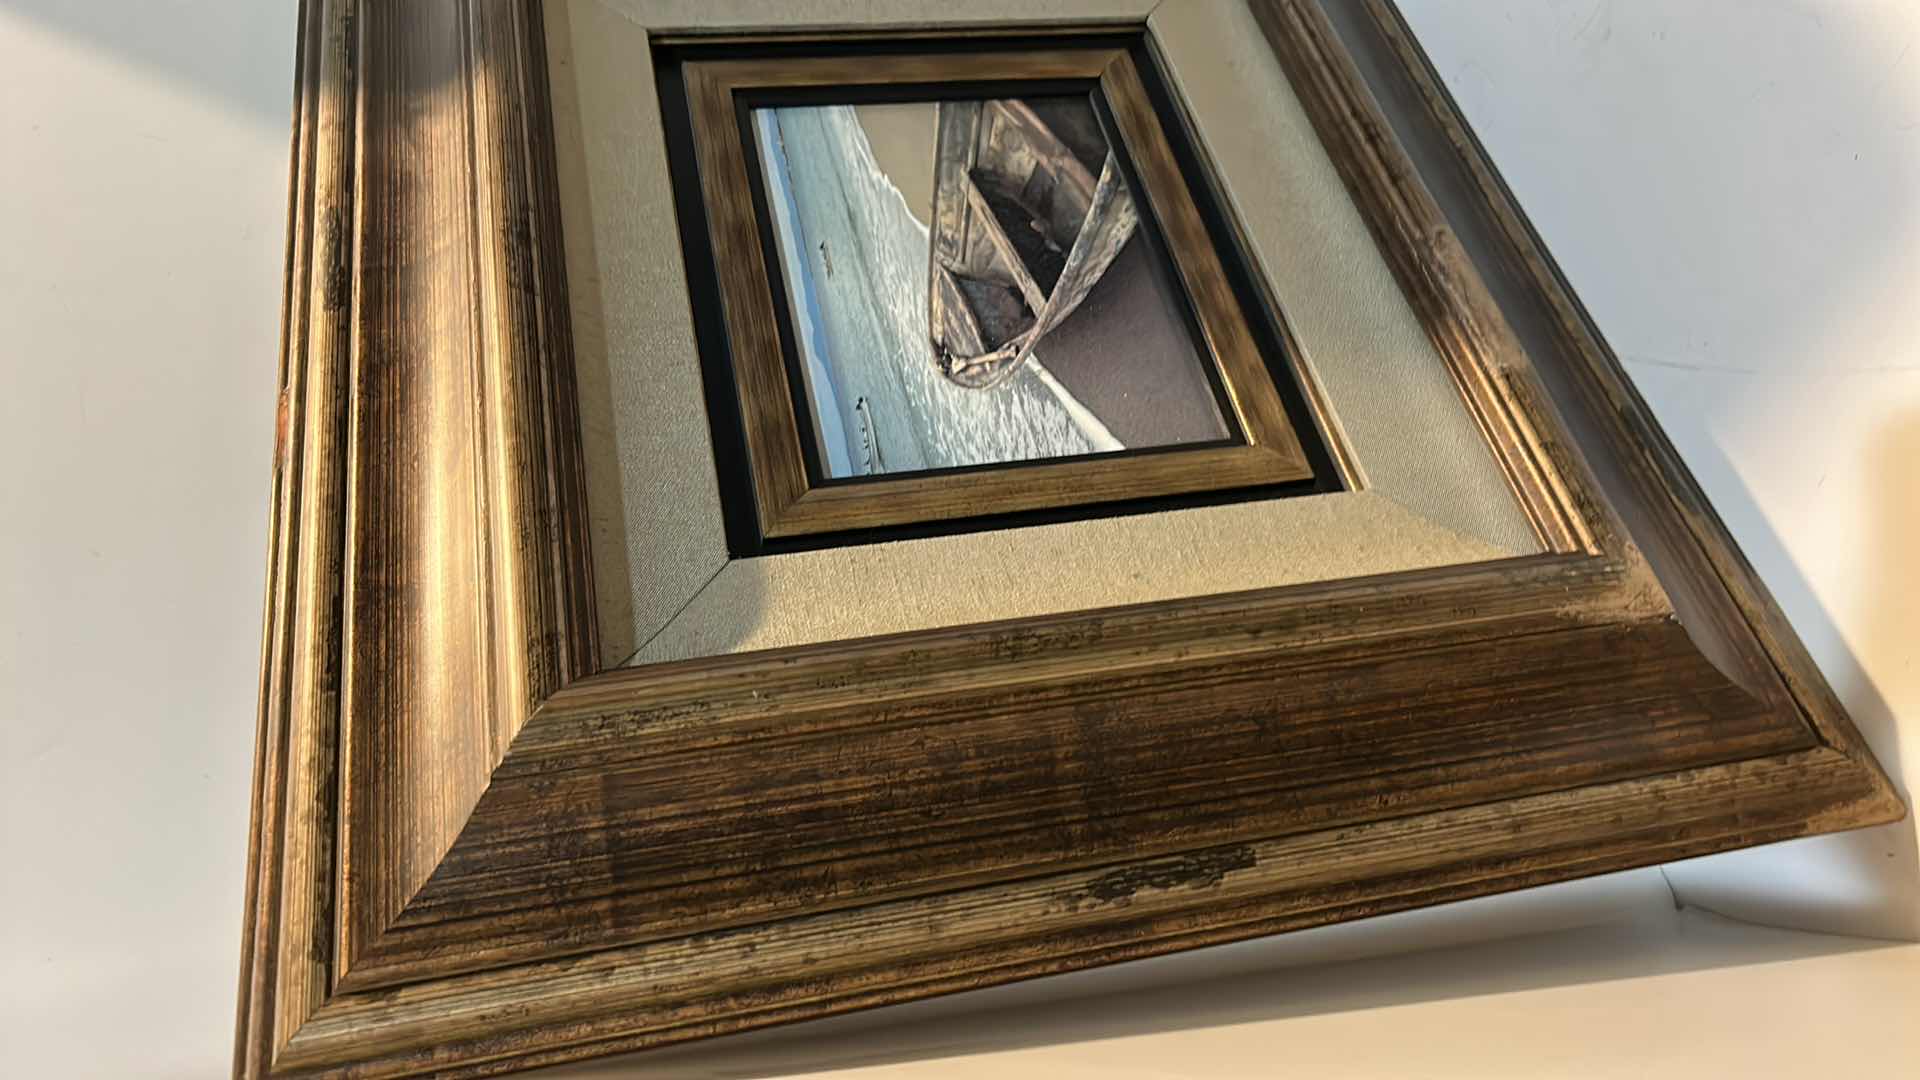 Photo 4 of WALL DECOR  -" BEACHED BOAT" ON SHORE ARTWORK IN WOOD FRAME 24” x 22”